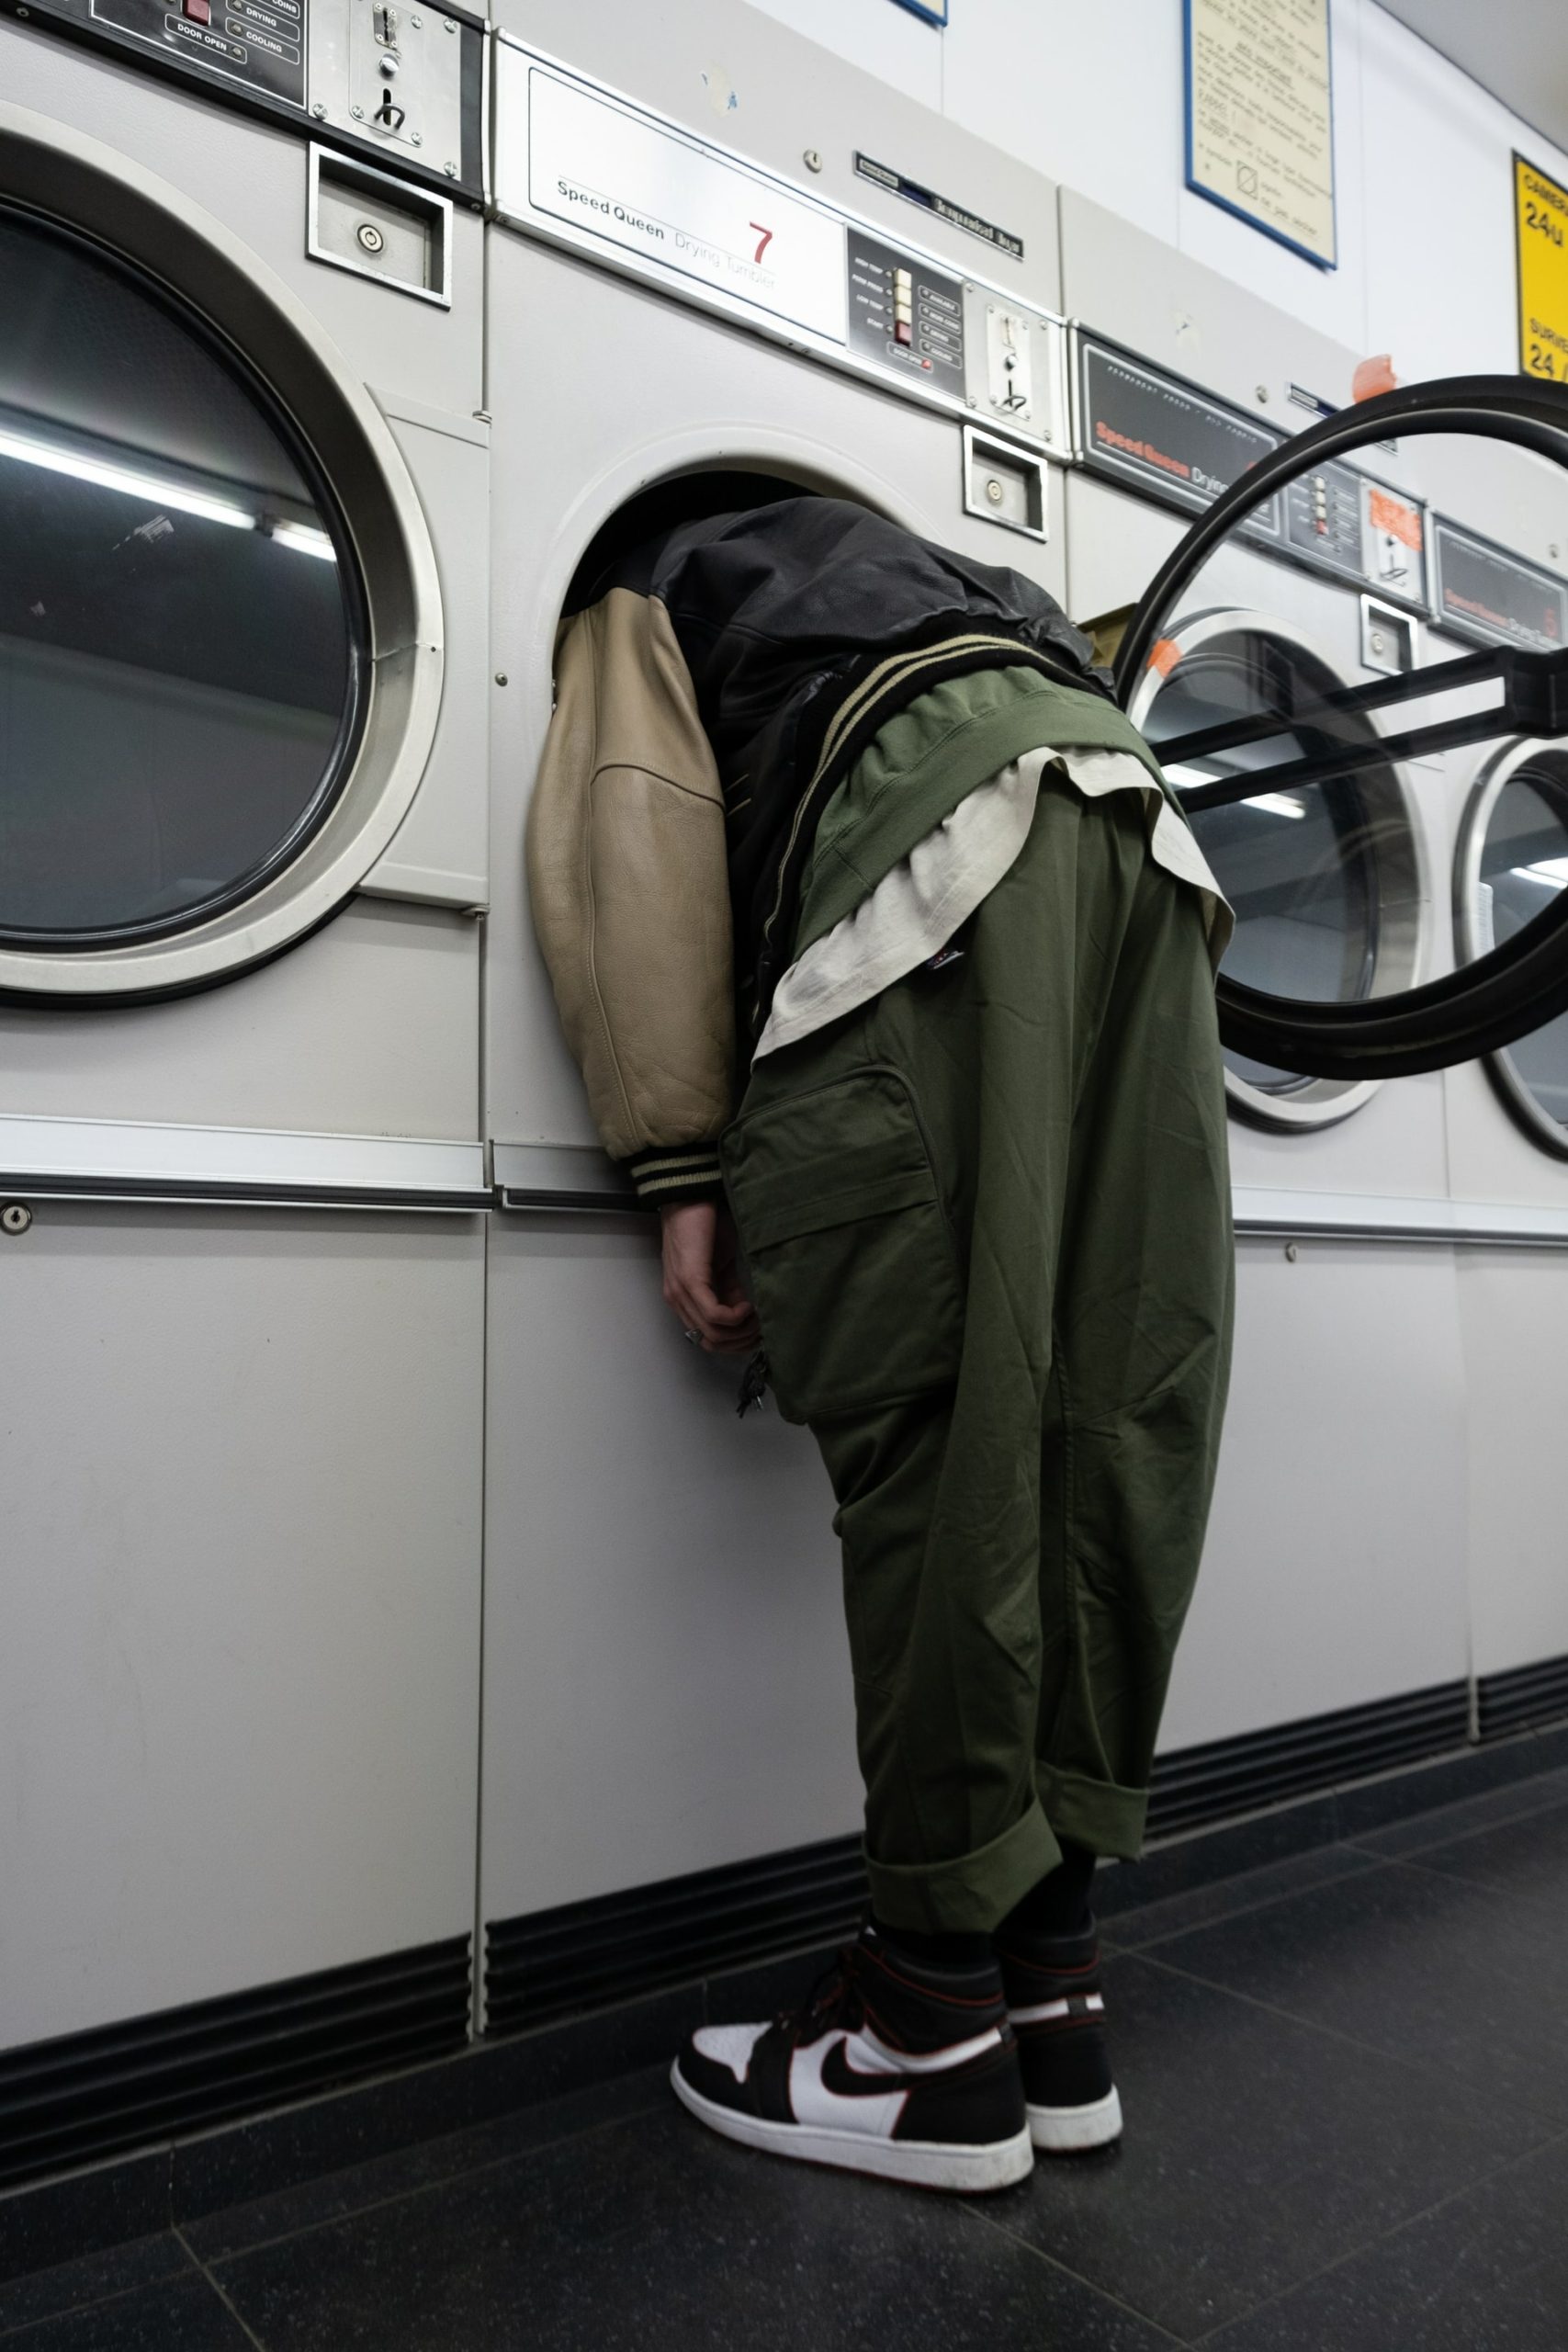 A person wearing green cargo pants, black and white running shoes and a old black vest with white sleeves, seen from behind as they place their head in a open washing machine in a laundrymat